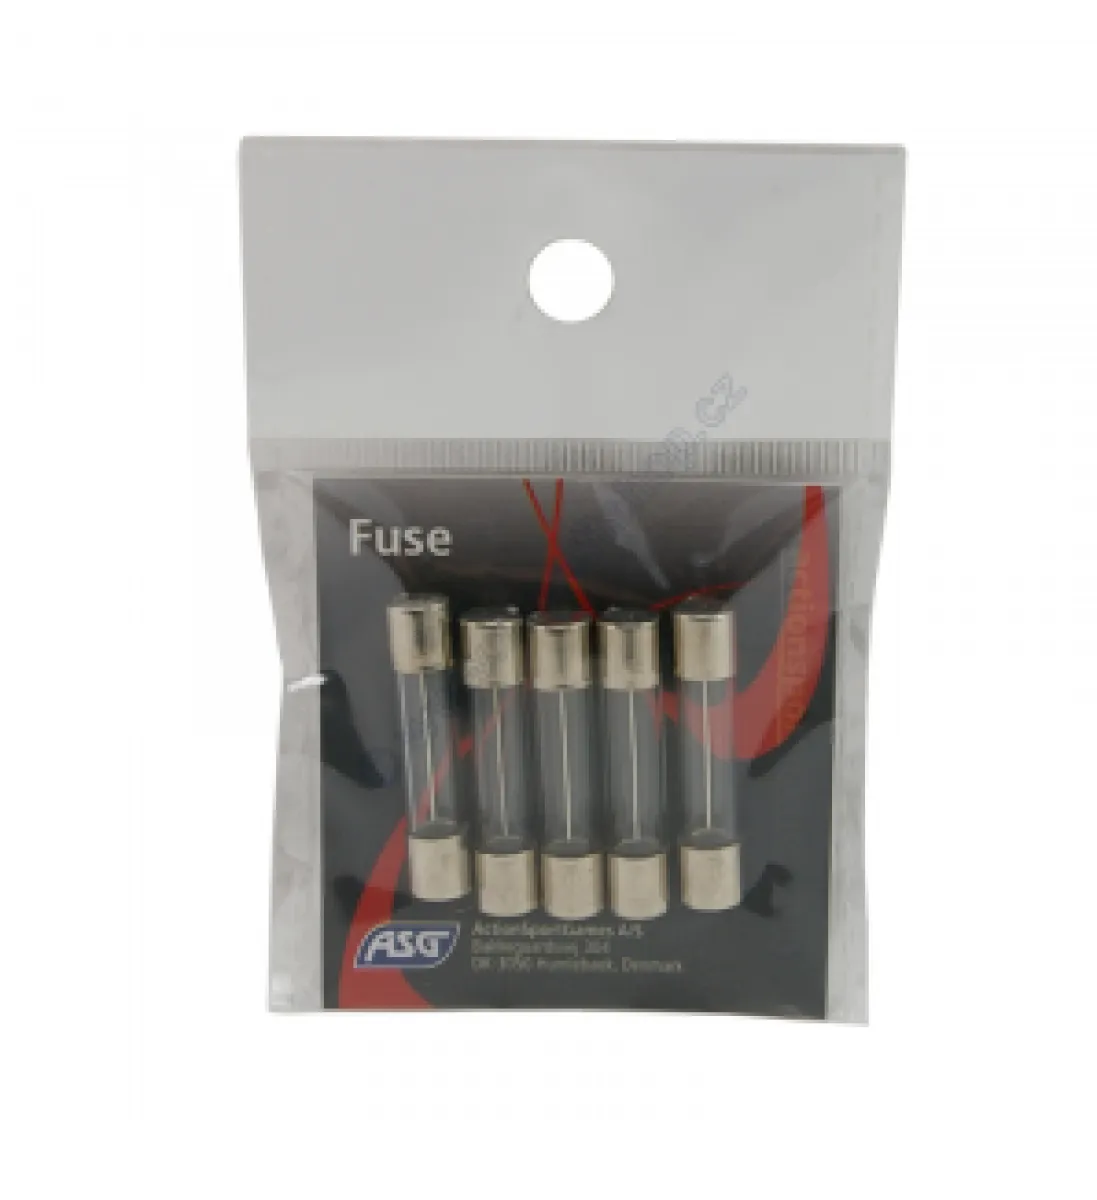 ASG Fuse 20A